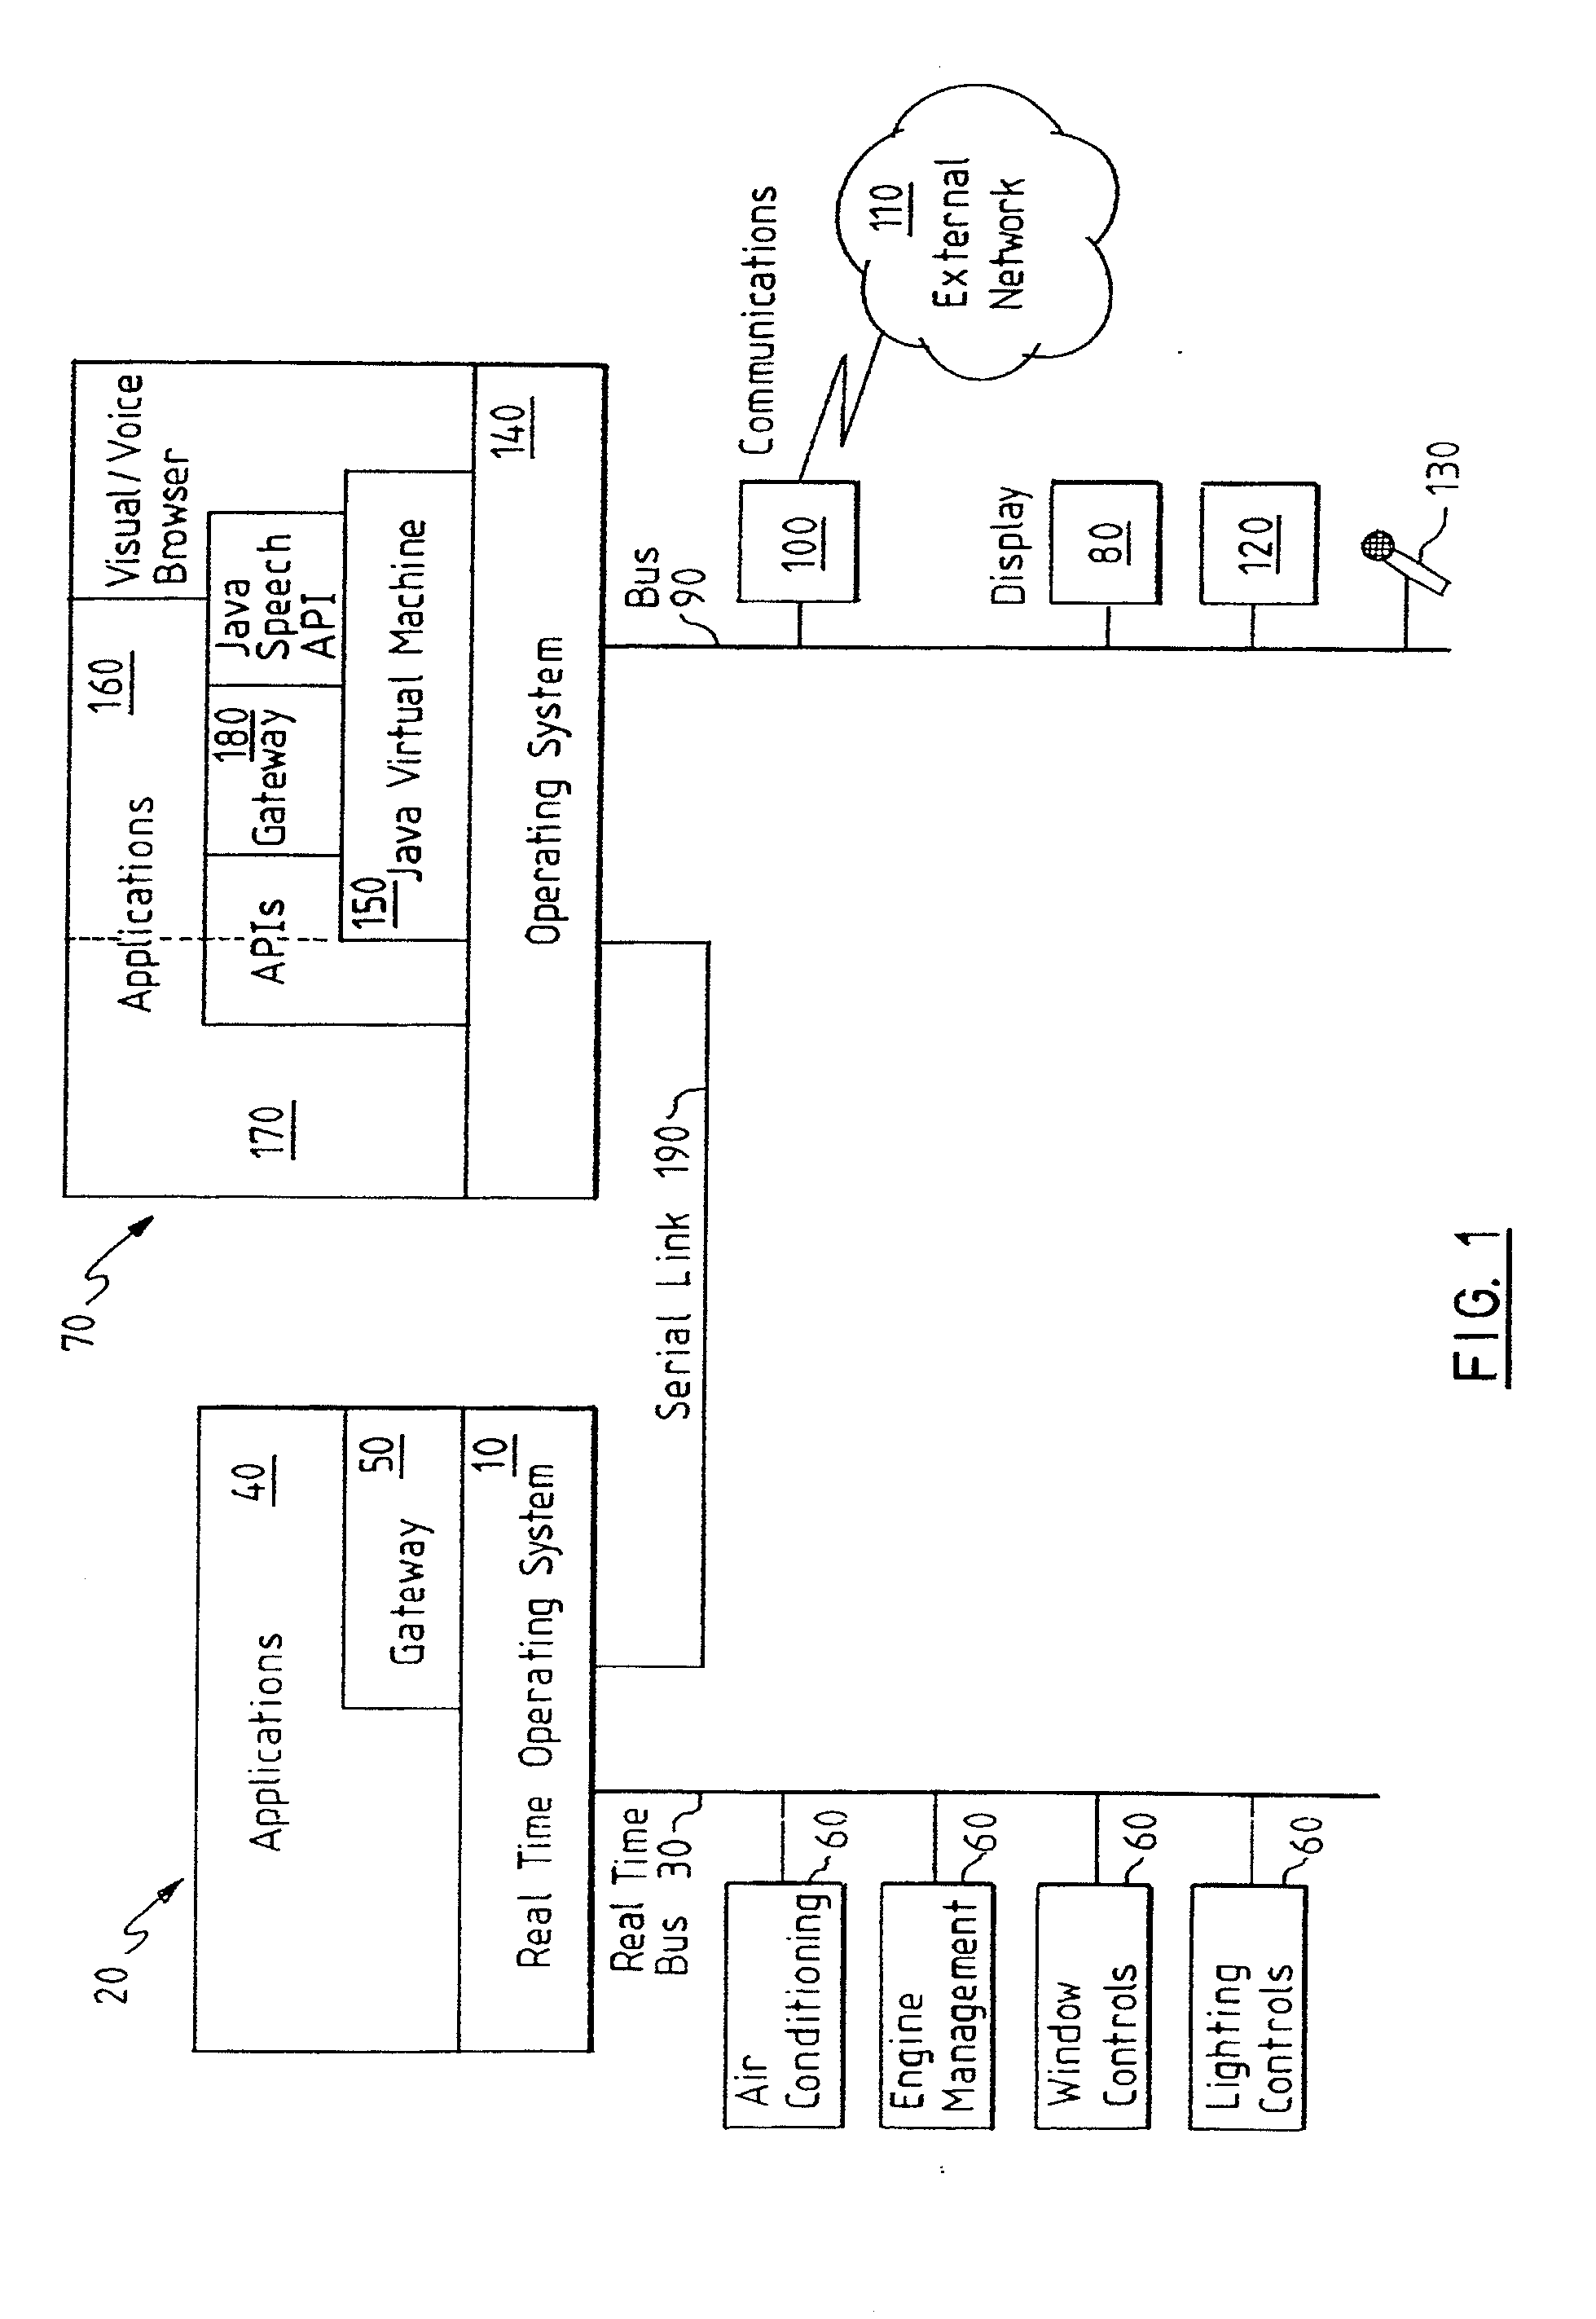 Security For Network-Connected Vehicles and Other Network-Connected Processing Environments